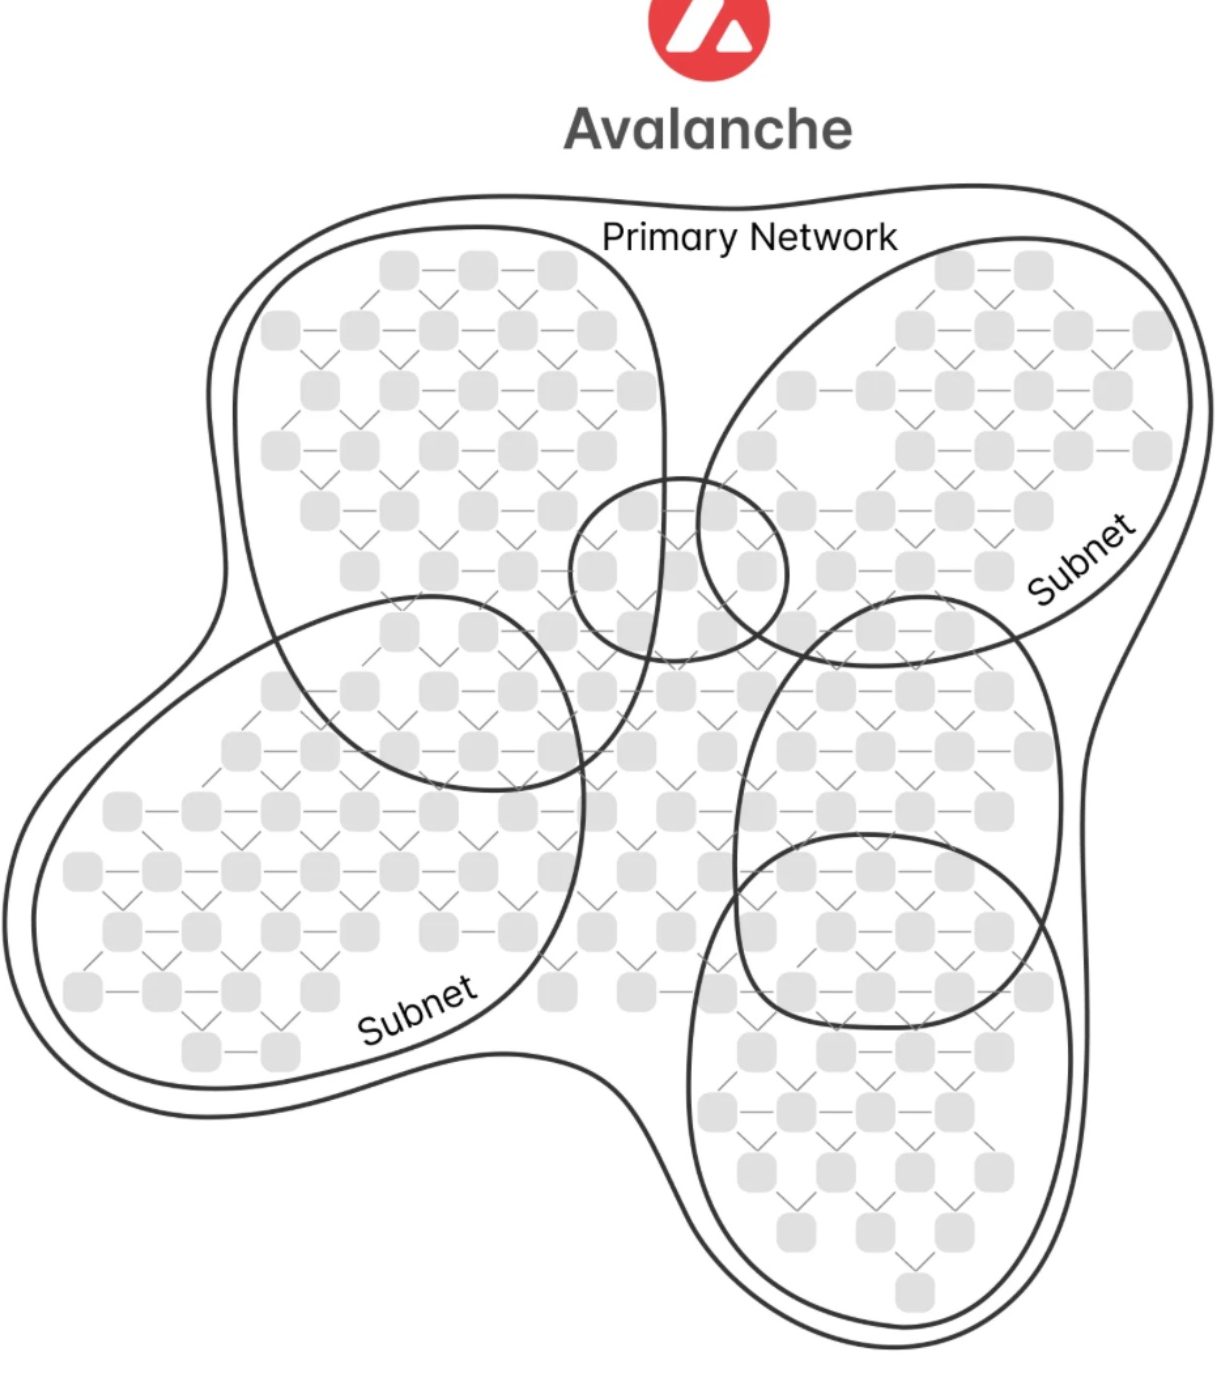 Avalanche subnets